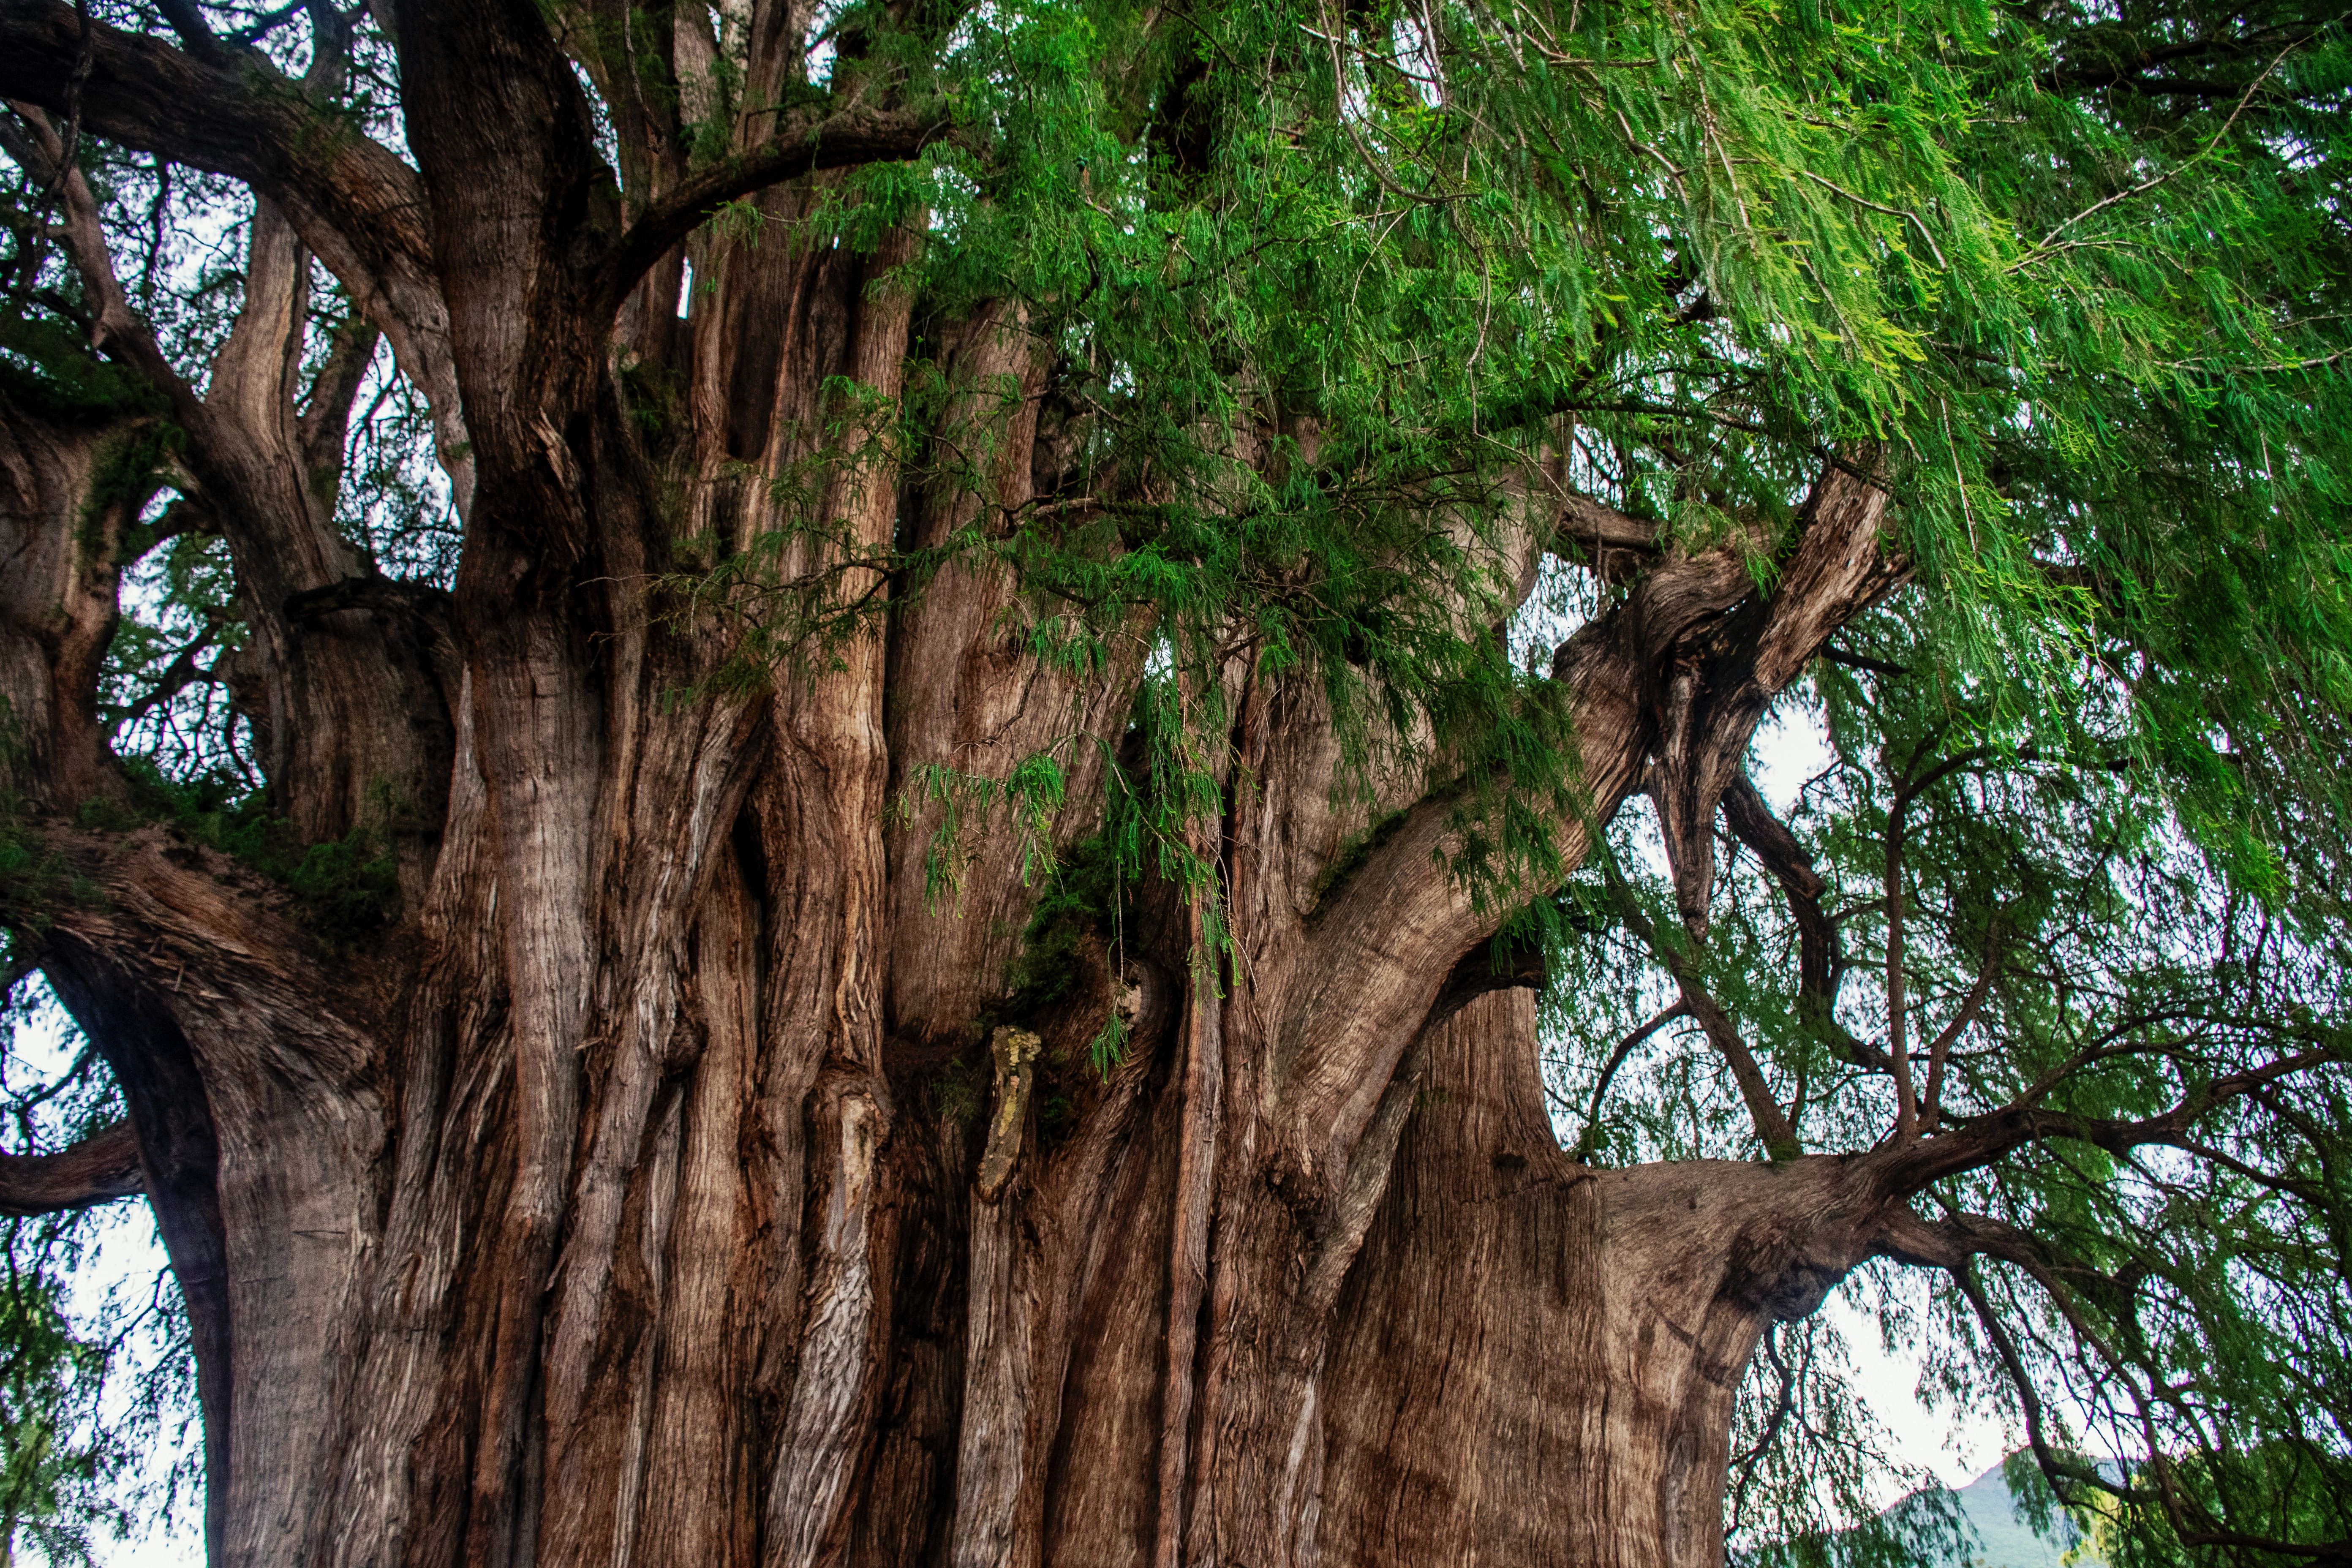 Here’s What To Know About Visiting El Tule, Mexico’s 2,000-Year-Old Giant Tree